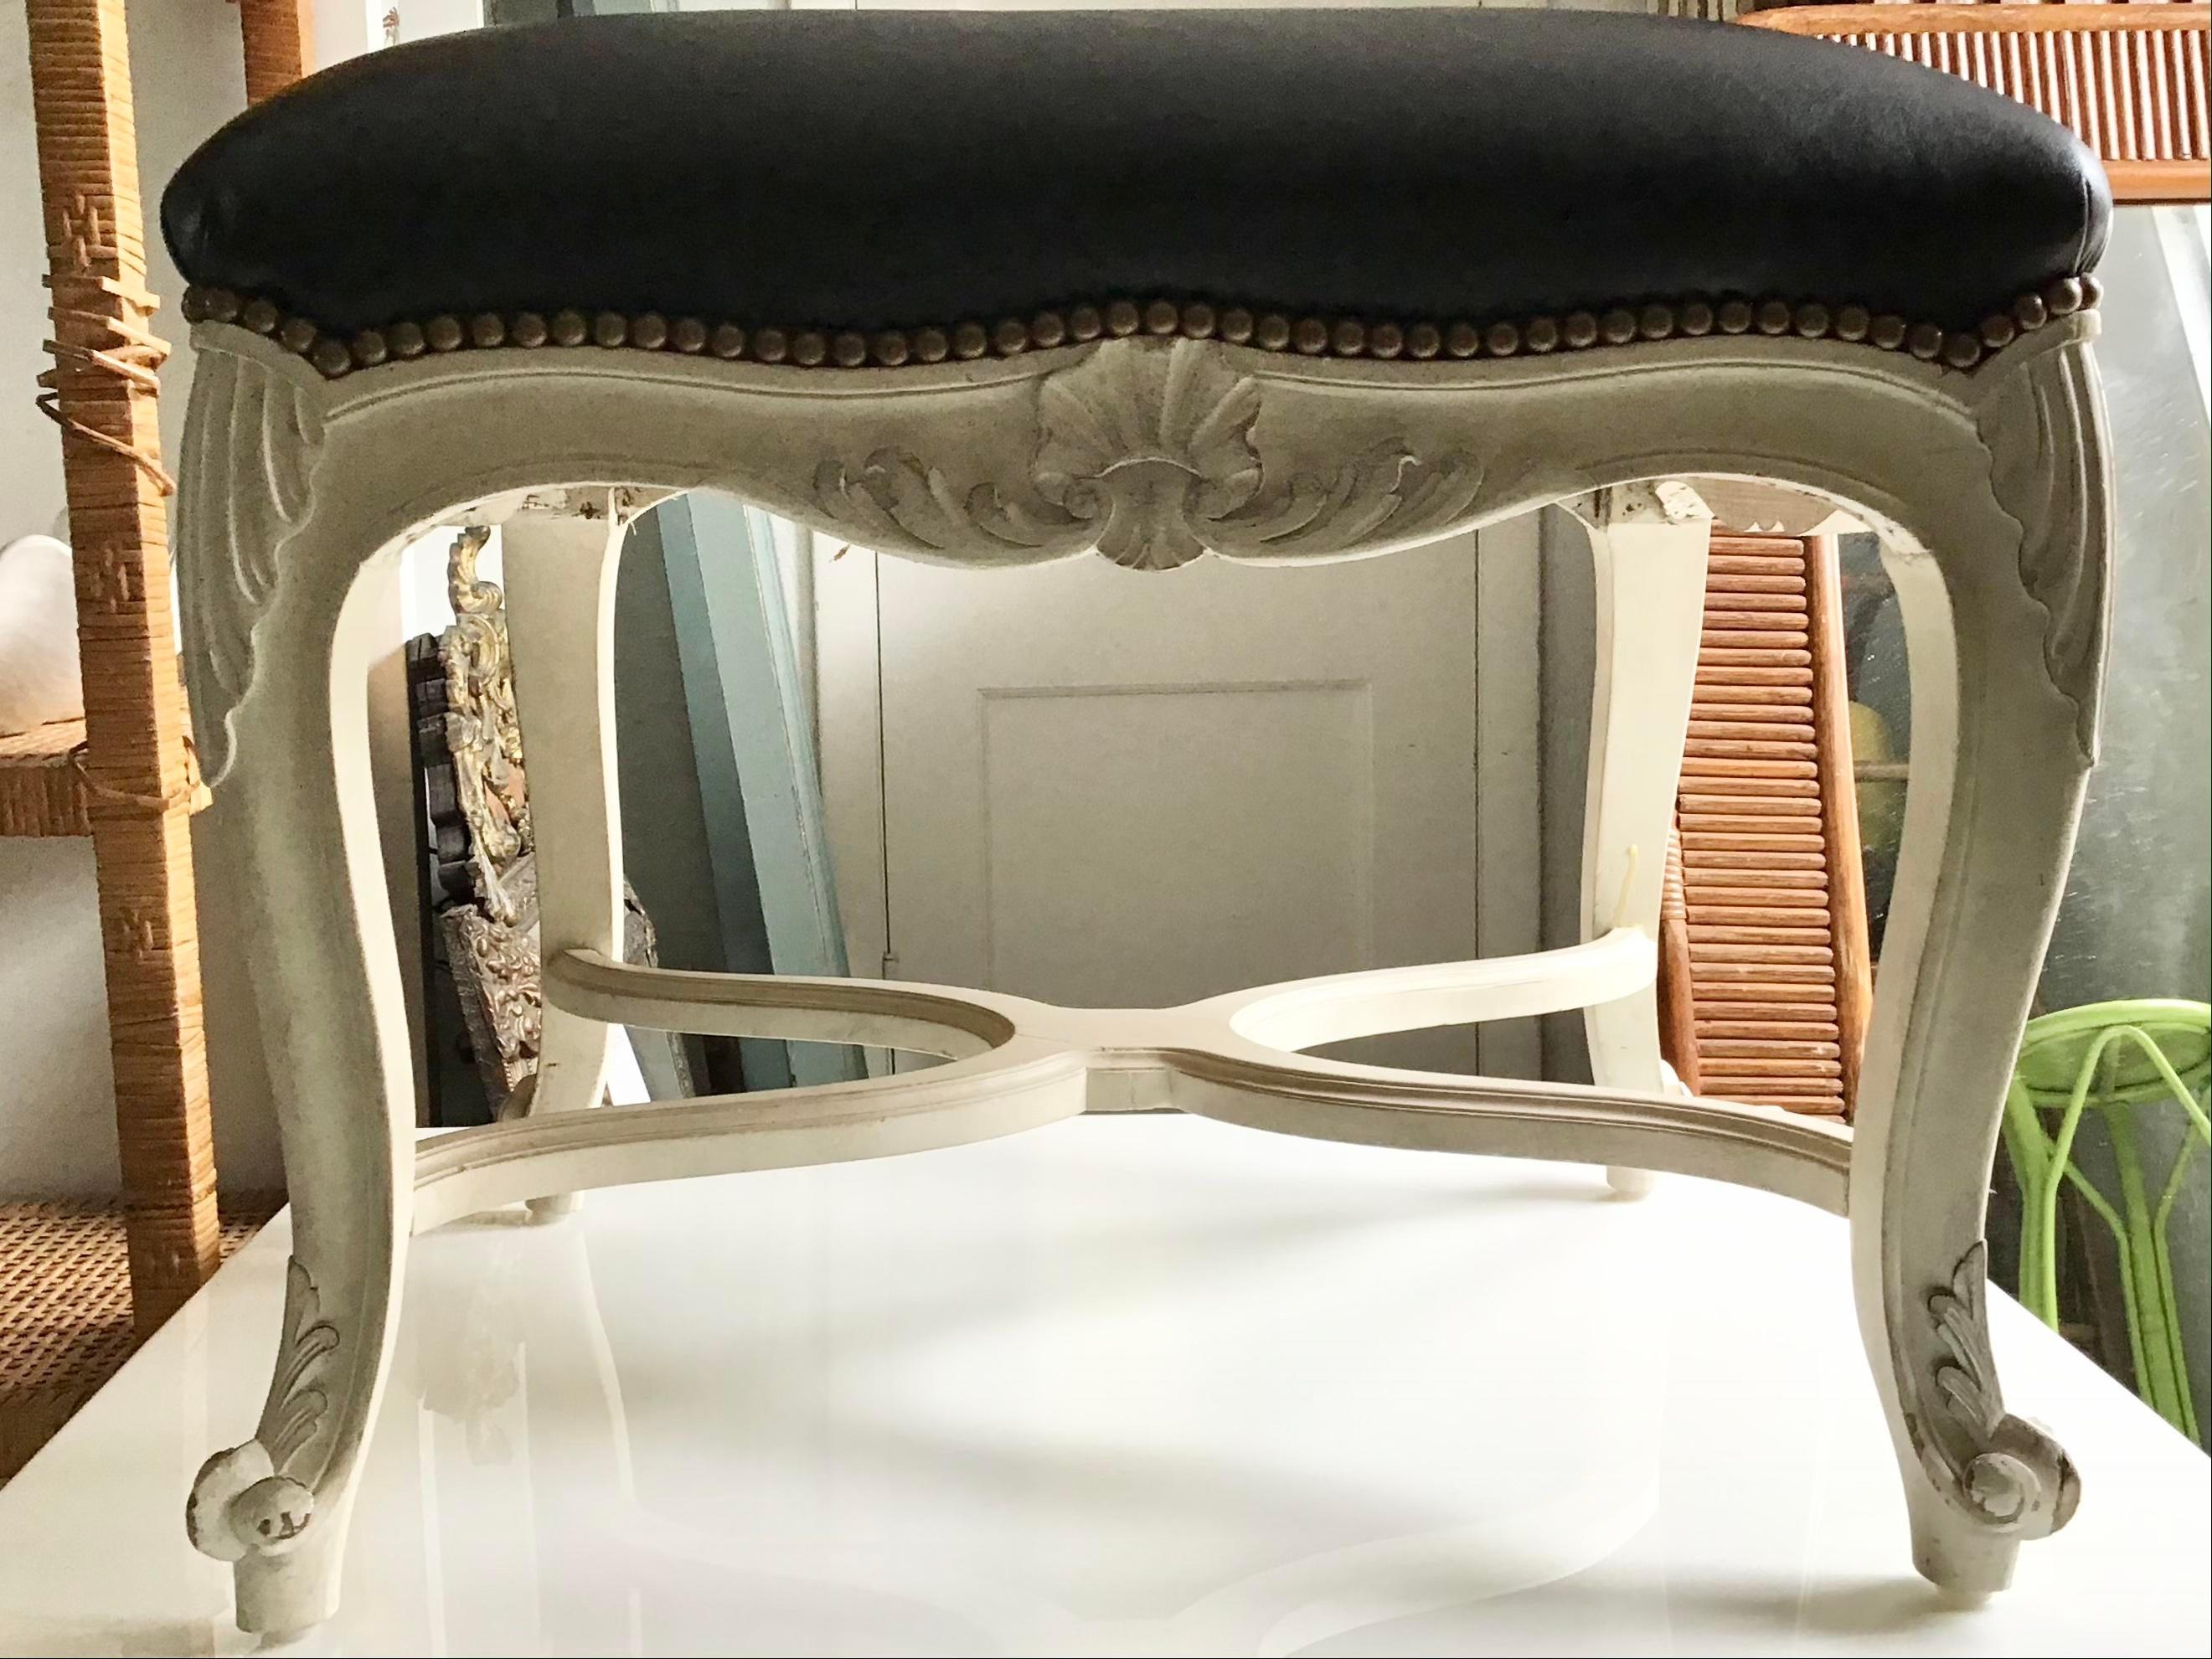 Gorgeous French Louis XV ottoman with black leather upholstery. Great carving details and original soft grey painted finish. Add some French style to your home with this accent French bench.